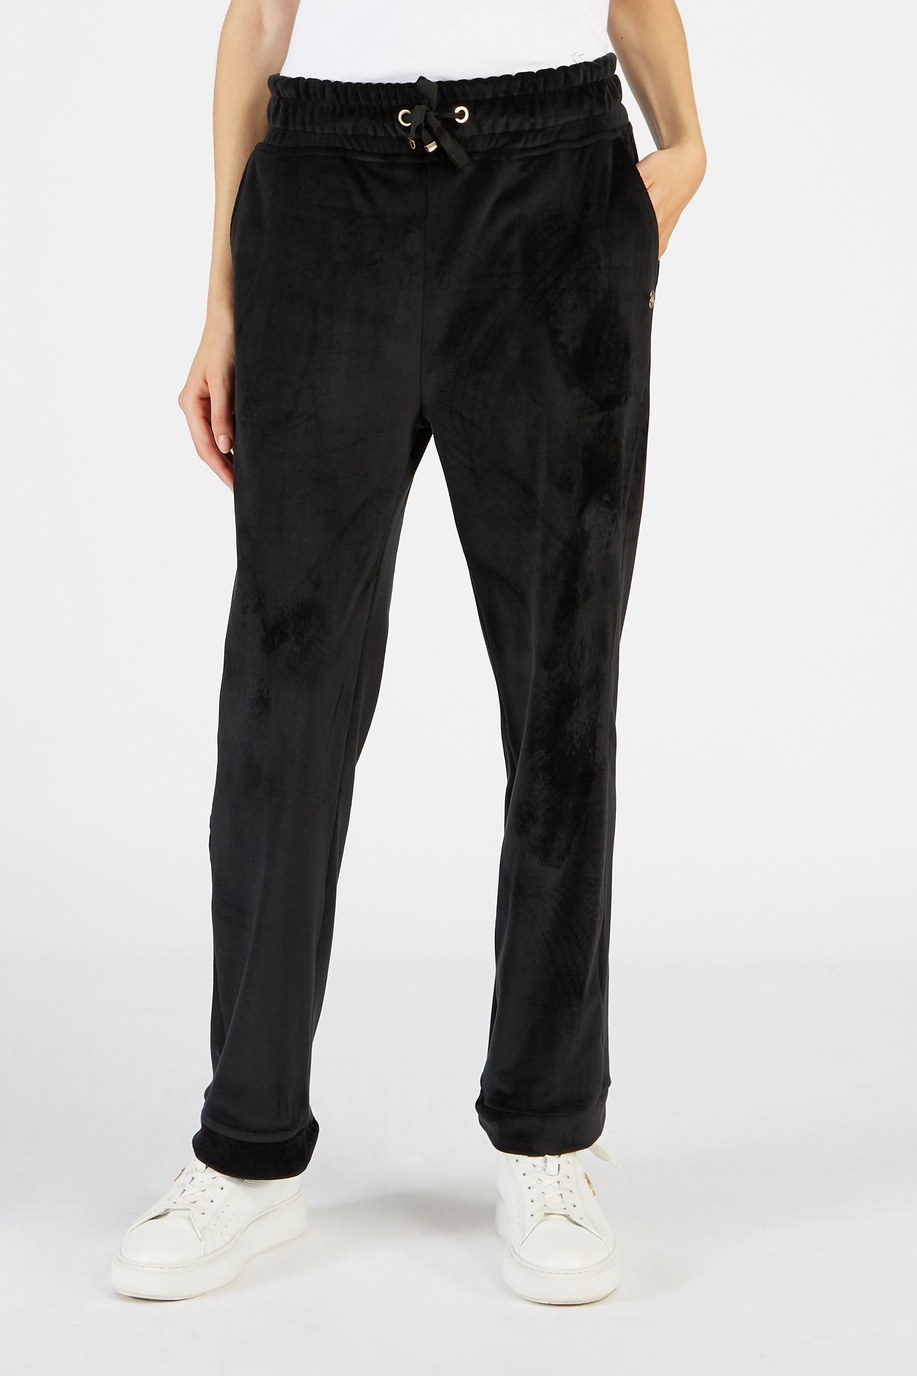 Women’s high-waisted trousers with narrow bottom - Jet Set | La Martina - Official Online Shop